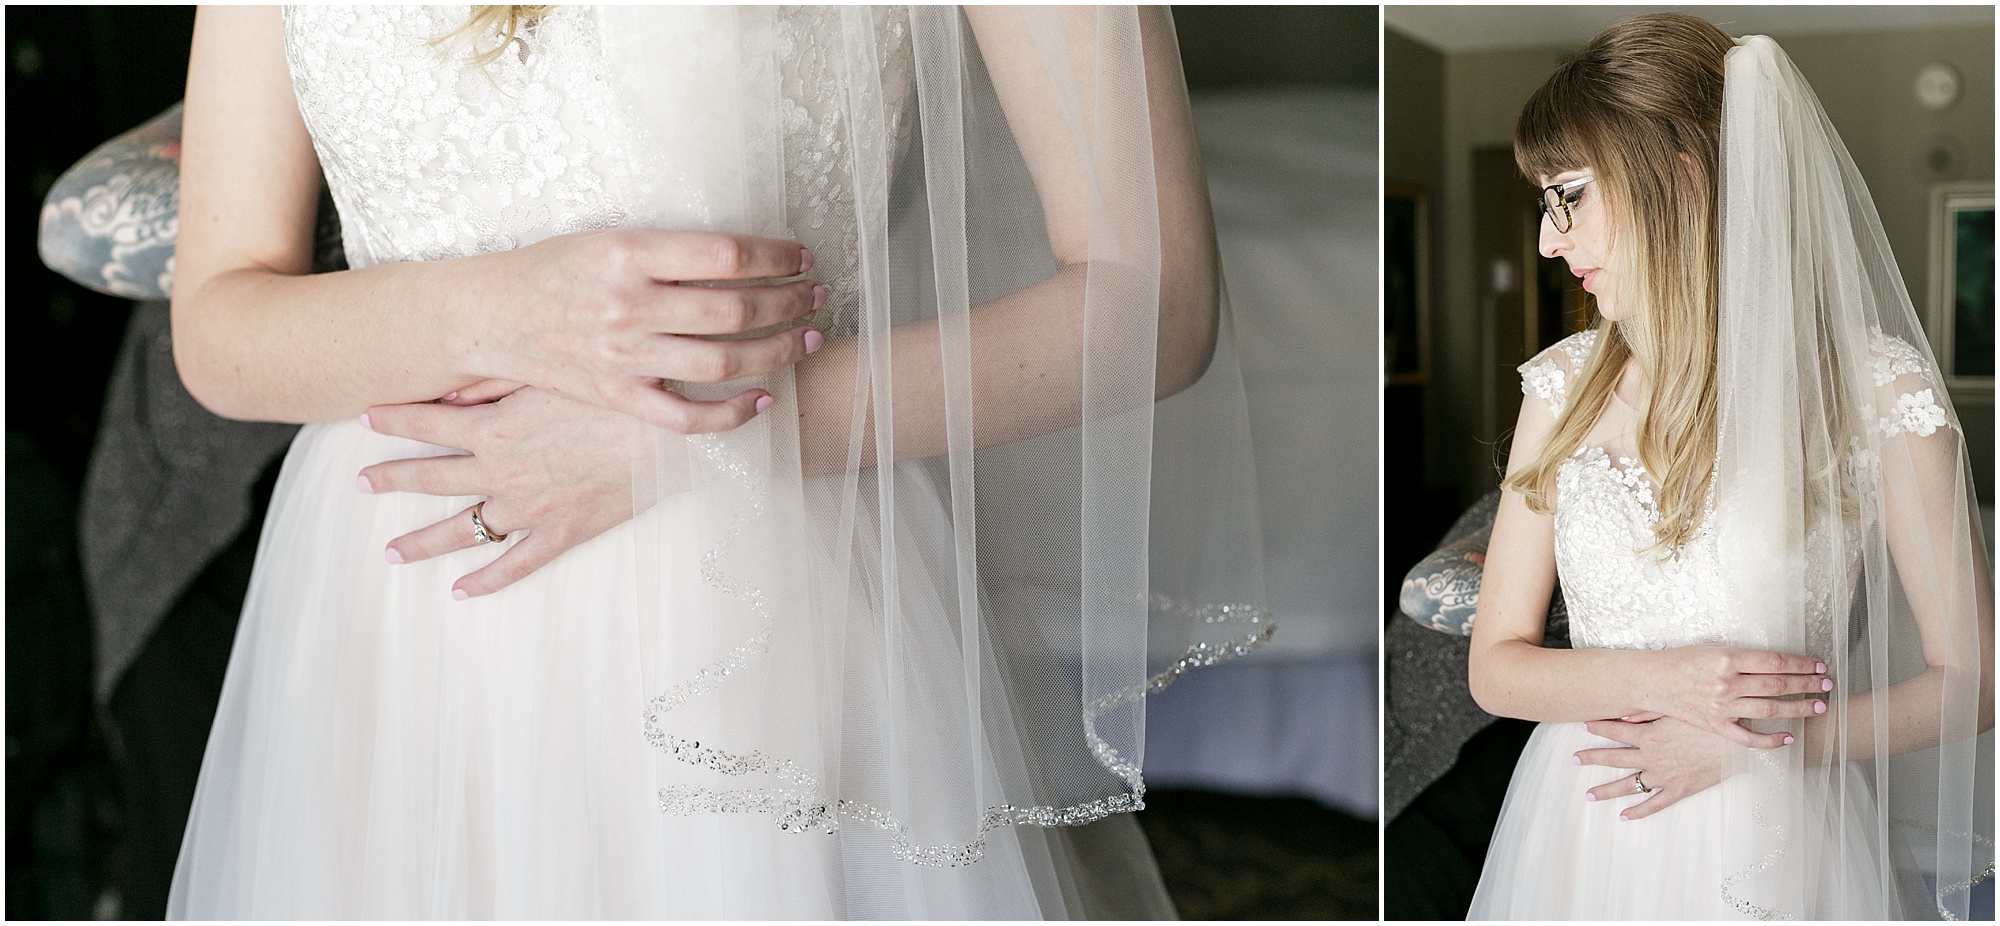 Bride in her wedding dress and veil.